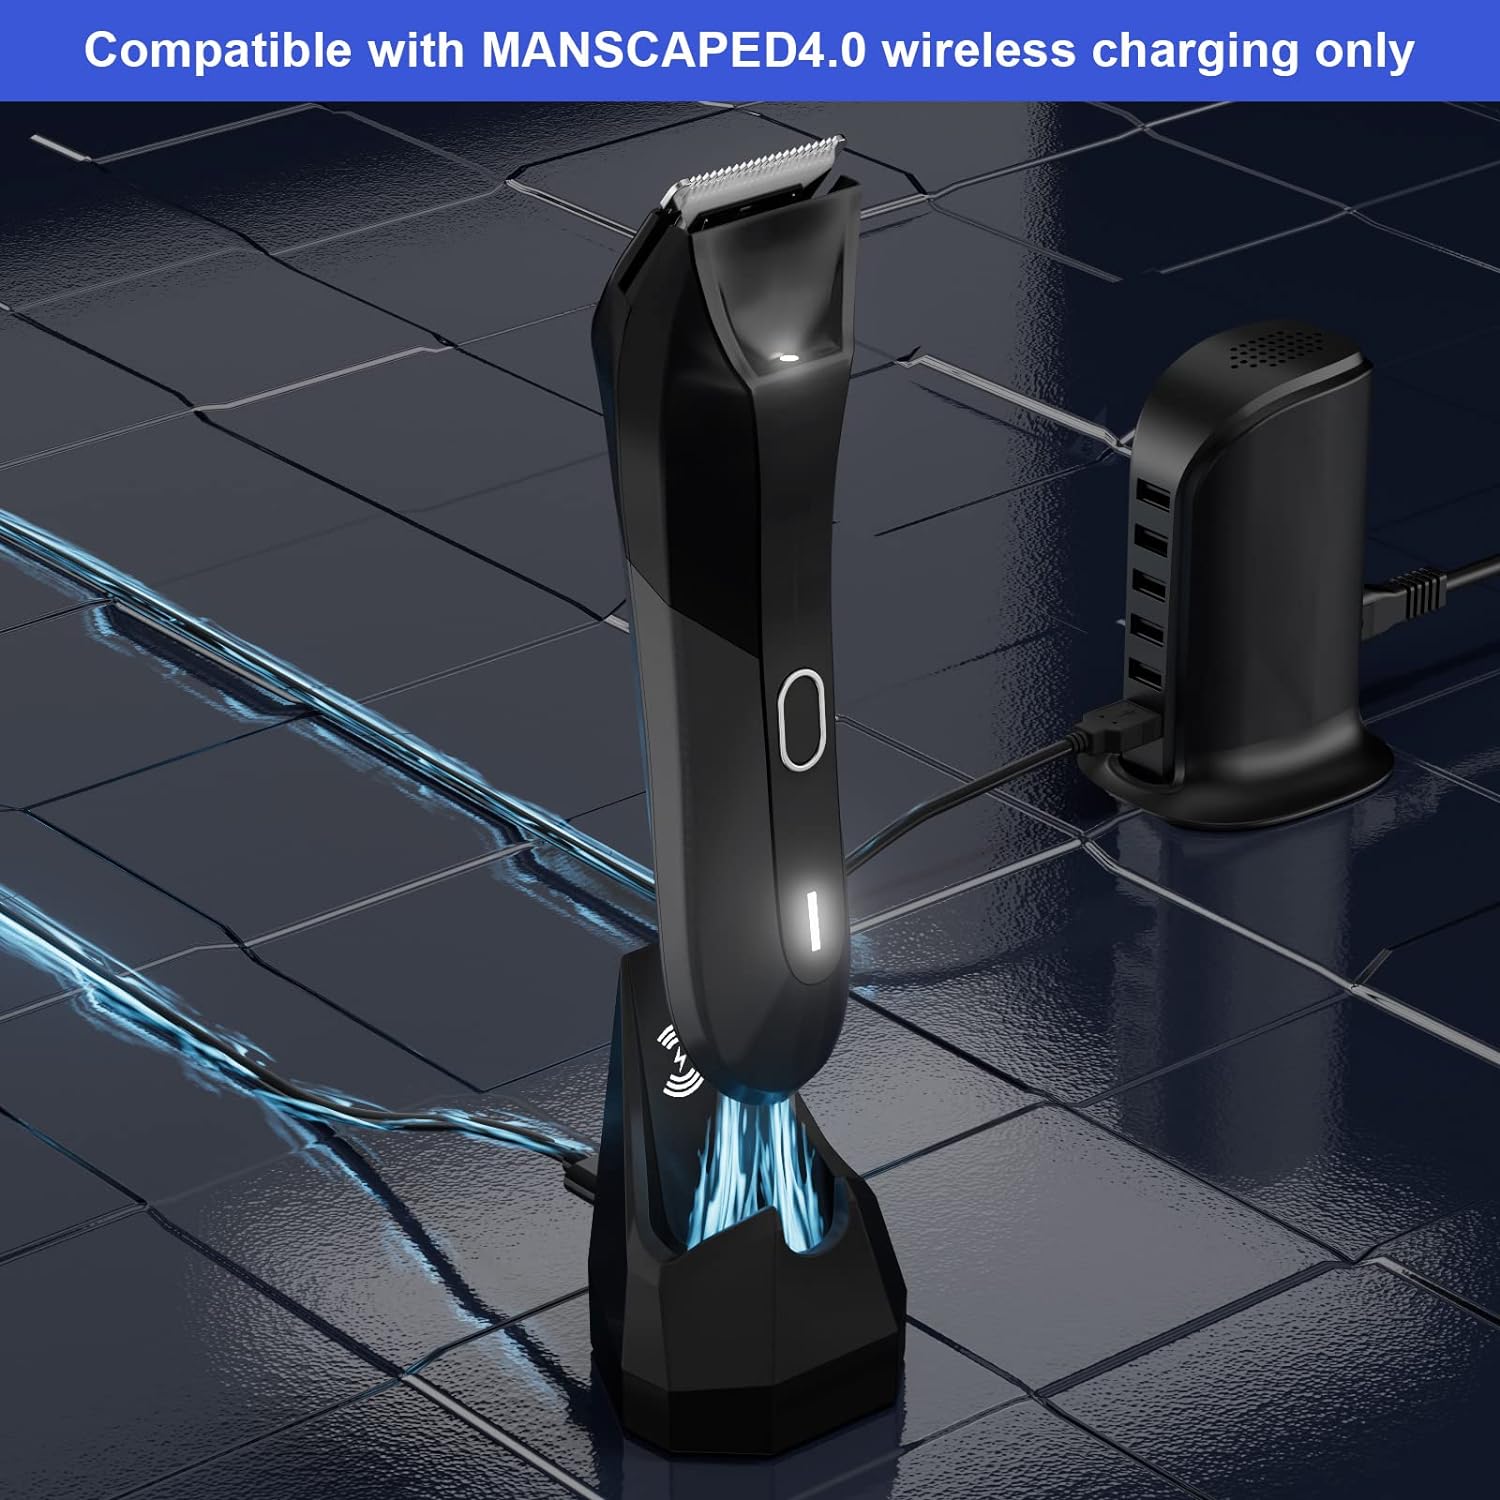 Charging Dock Repalcement for MANSCAPED 4.0 with AC Adapter, Wireless Charging Stand Only Compatible with MANSCAPED The